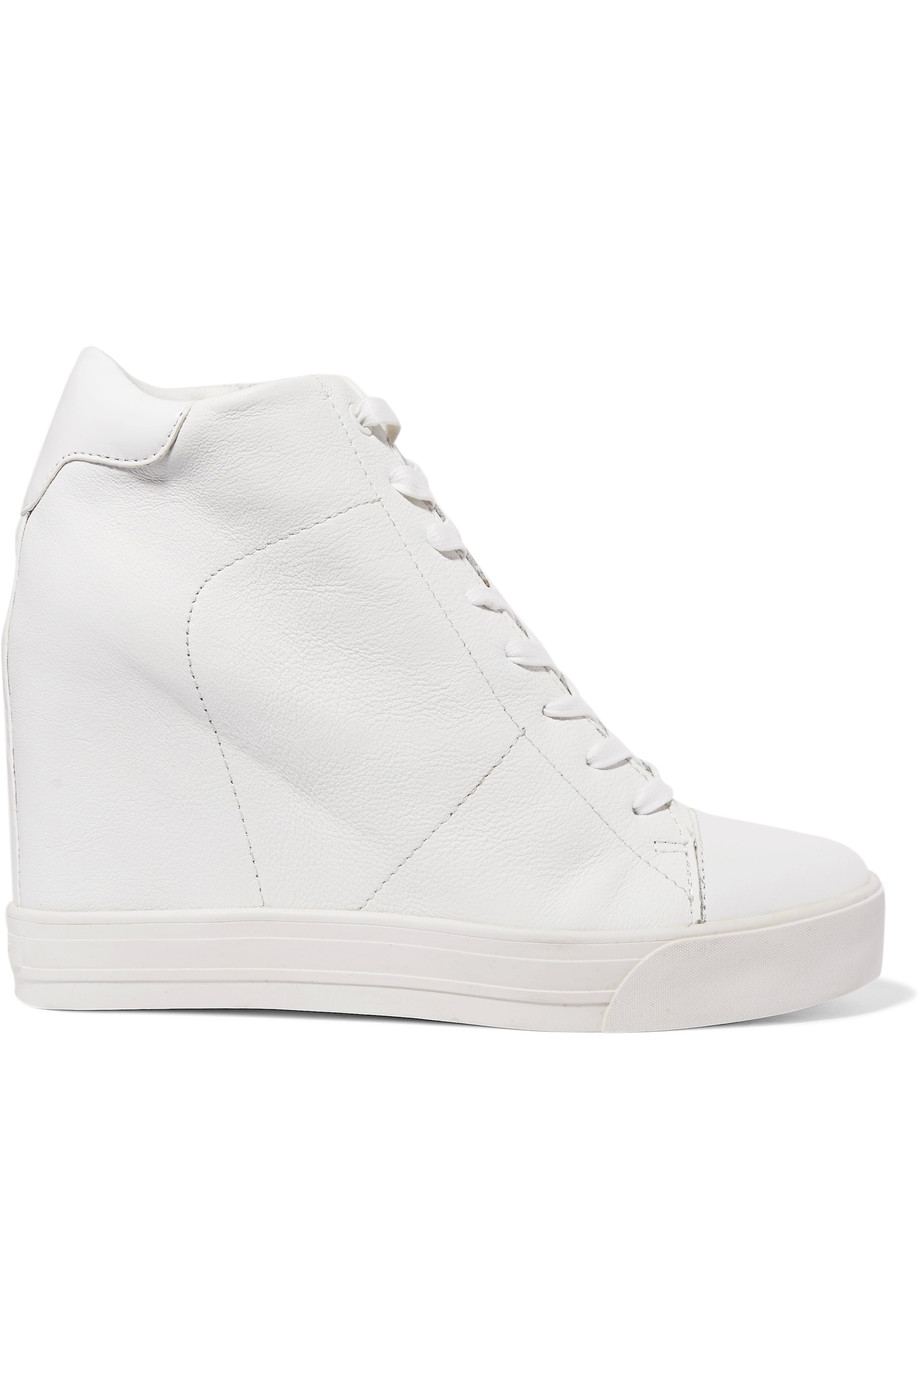 Dkny Ginnie Leather Wedge Sneakers | ModeSens